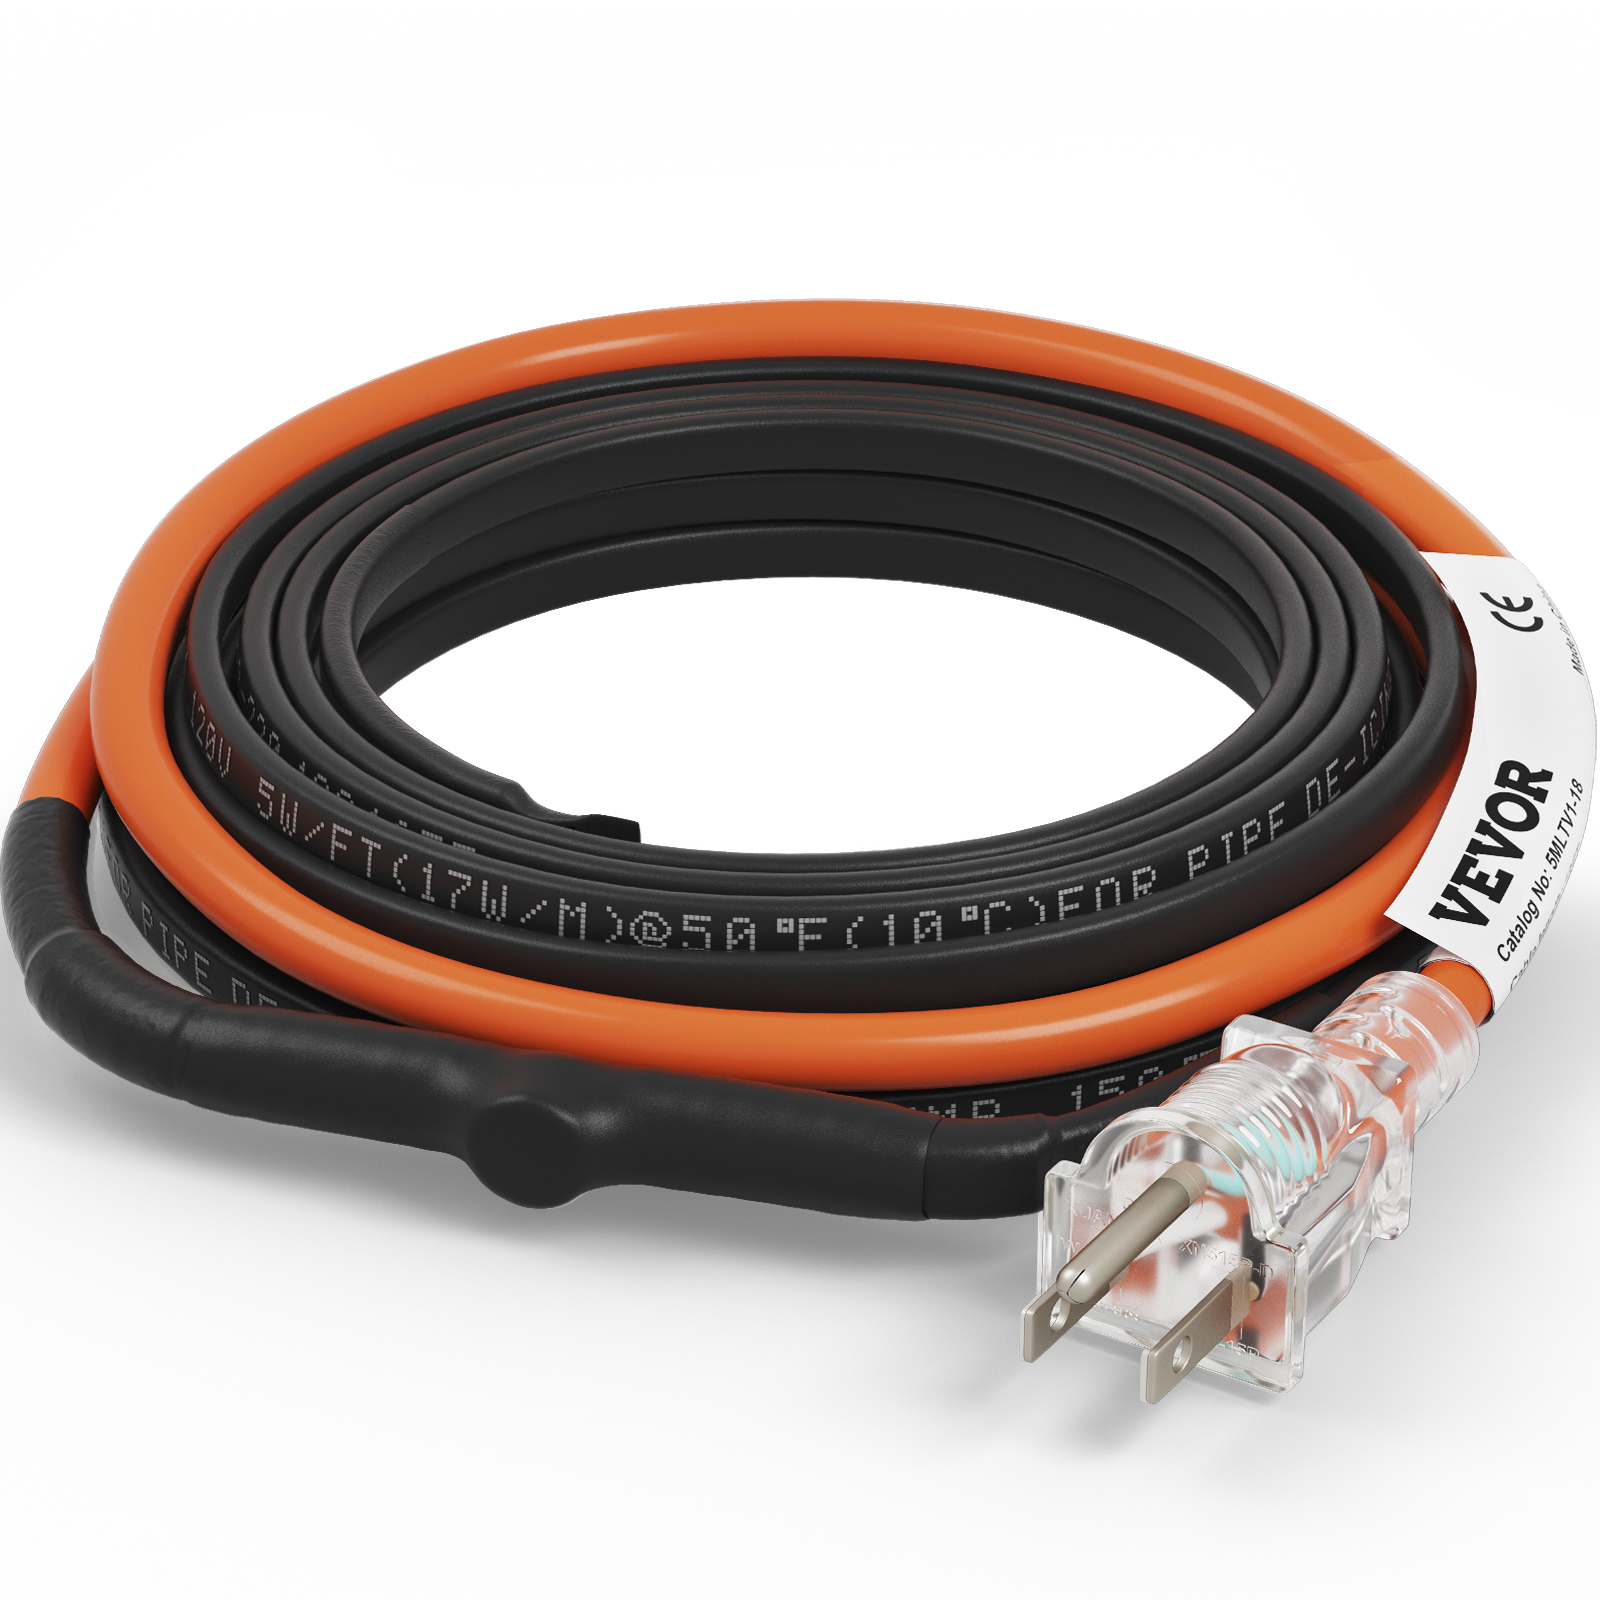 Self-Regulating Pipe Heating Cable, 140-feet 5W/ft Heat Tape for Pipes,  Roof Snow Melting